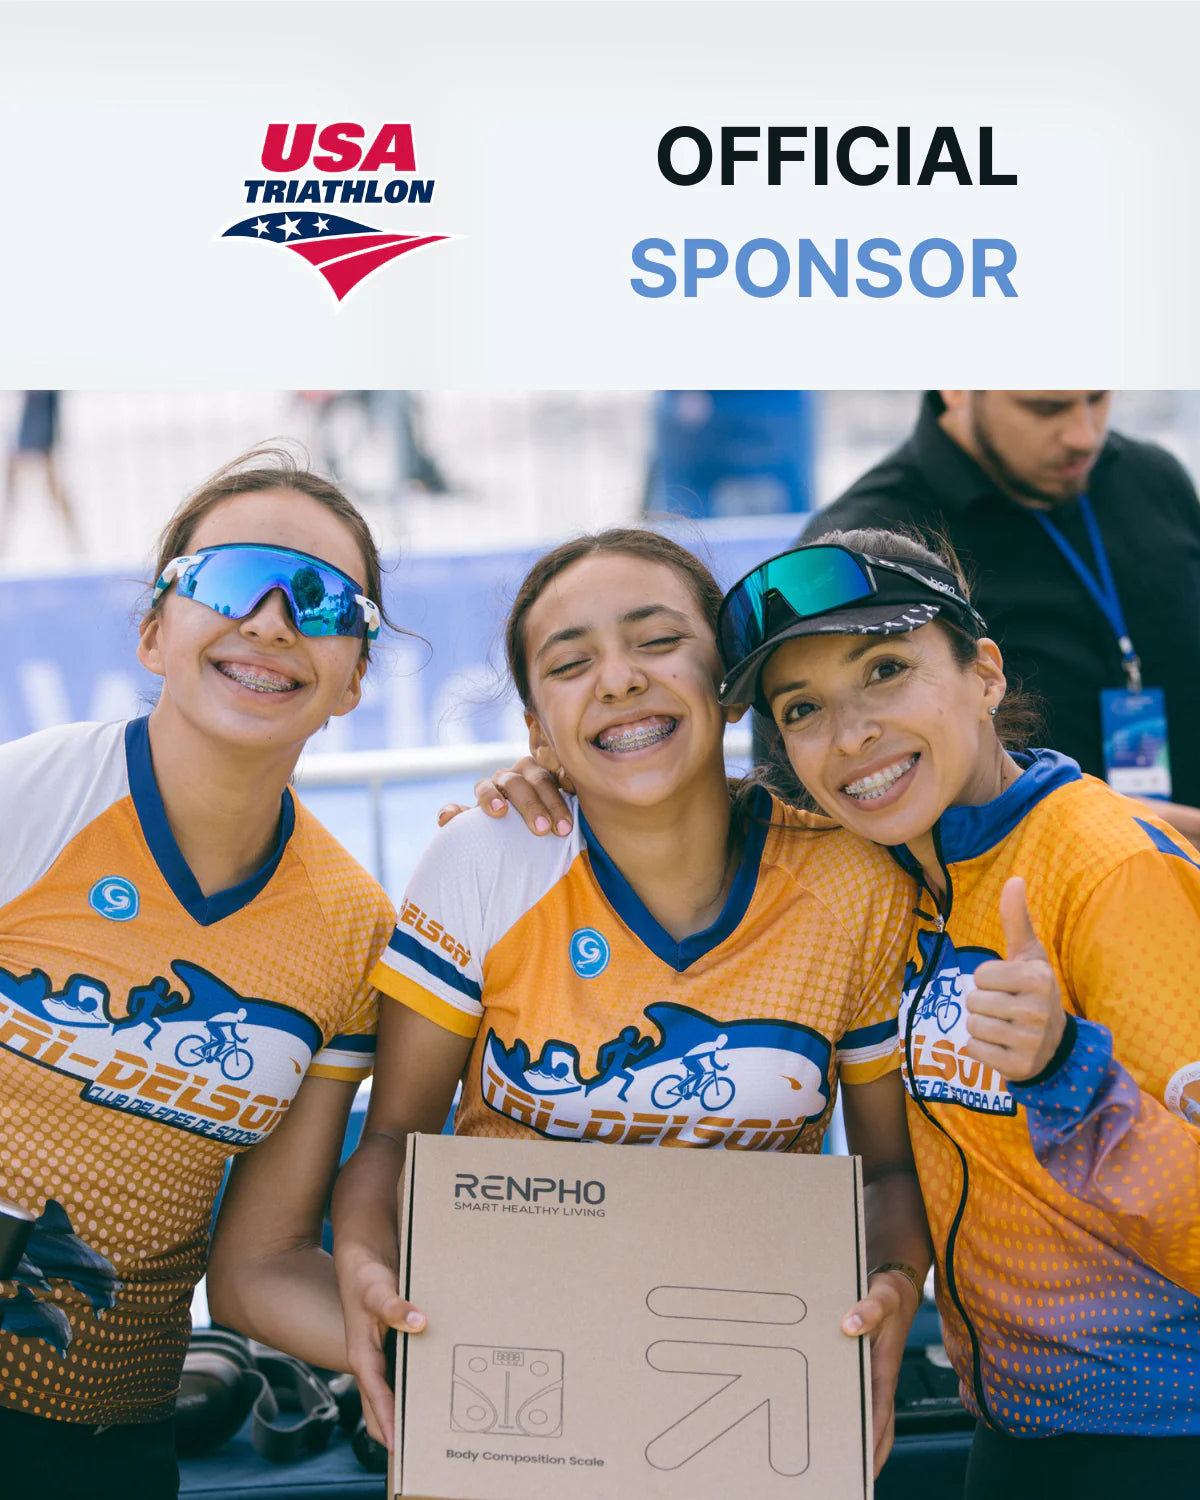 Three female cyclists in USA triathlon jerseys, smiling and posing together at an event focused on health, with one holding the Elis Aspire Smart Body Scale.